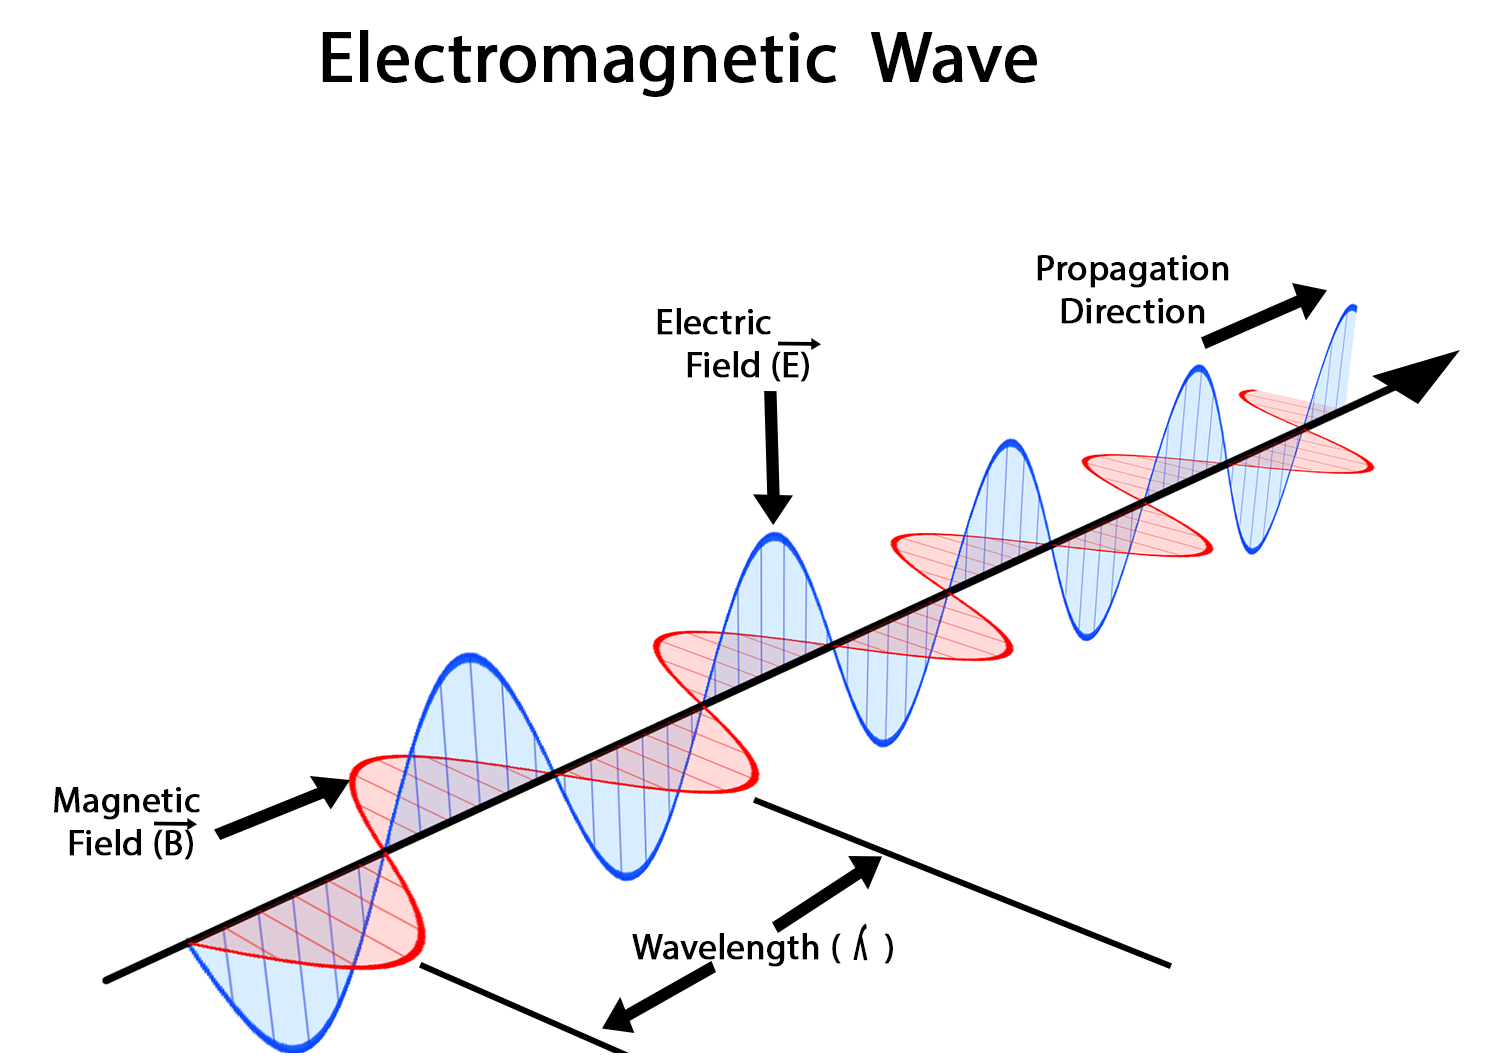 The blue wave represents the electric field E and the red wave represents the magnetic field and the direction of propagation is perpendicular to E and B.